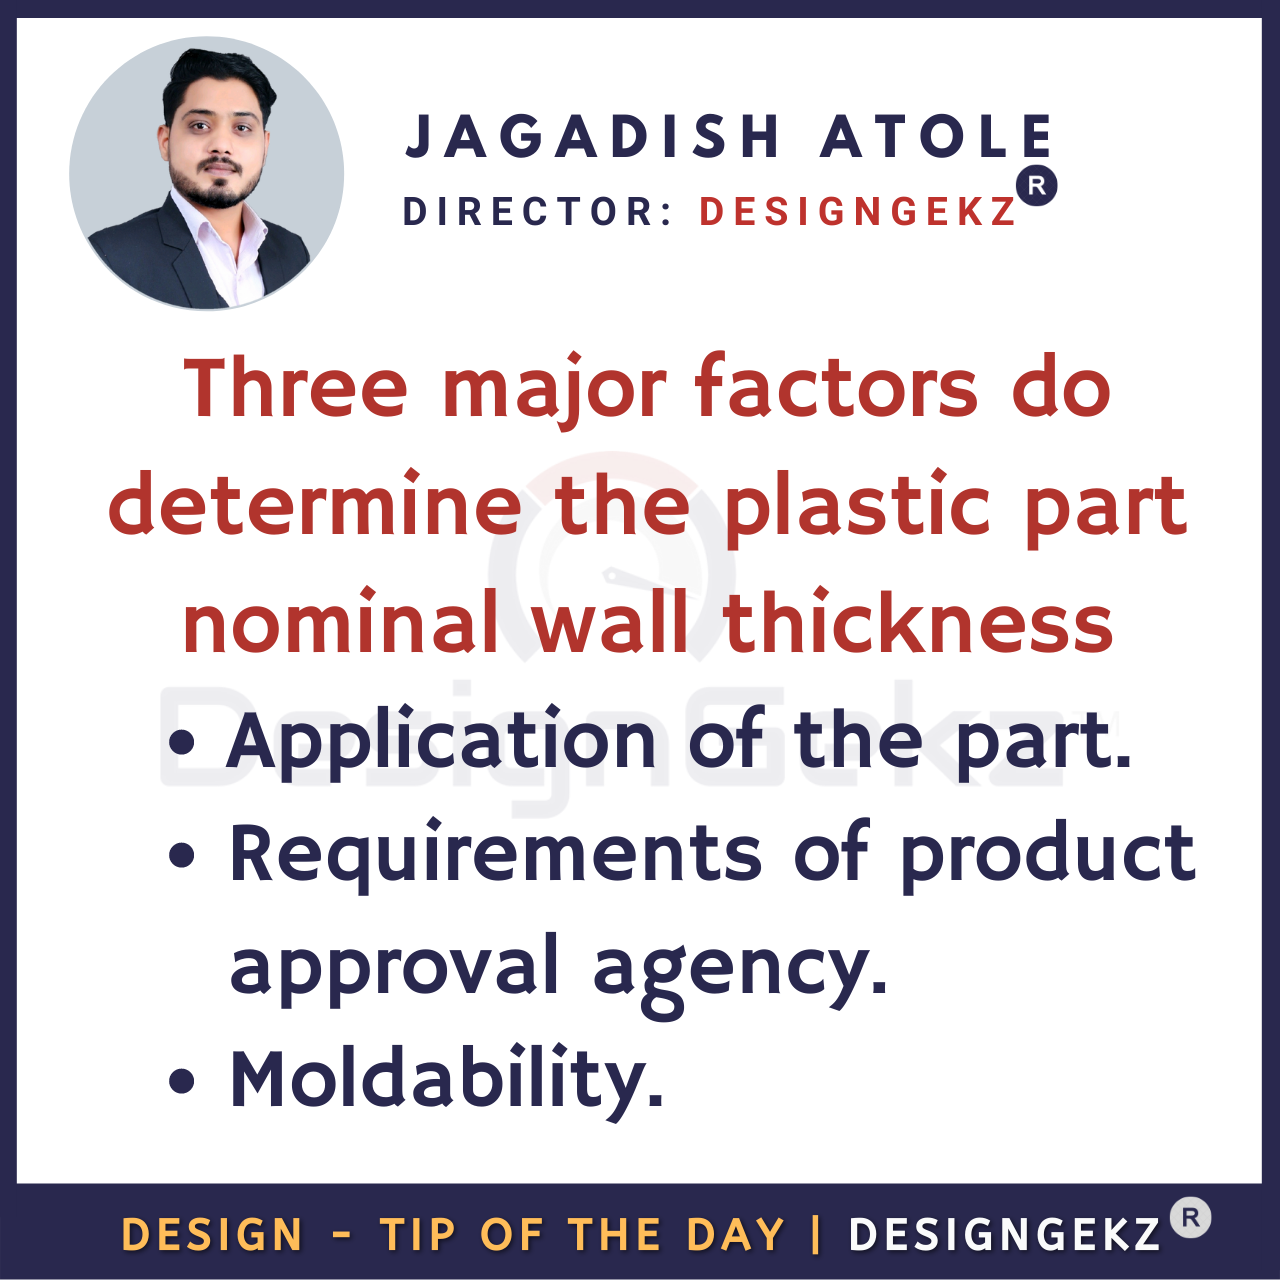 Plastic part nominal wall thickness_plastic part thickness_thickness of plastic part_how to determine plastic part thickness_how to decide plastic part thickness_jagadish atole_jagdish atole_designgekz